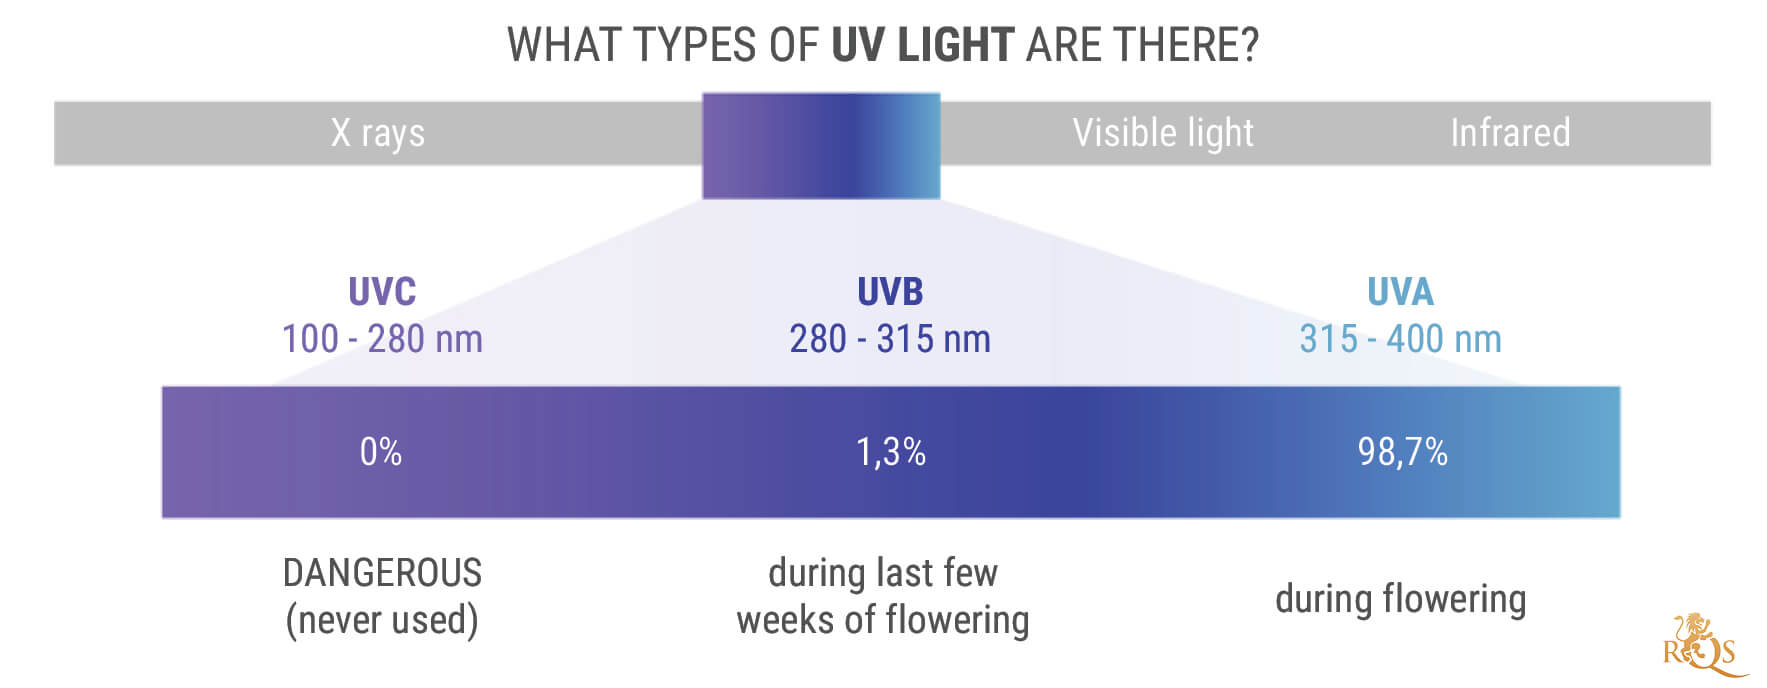 What Types of UV Light Are There?